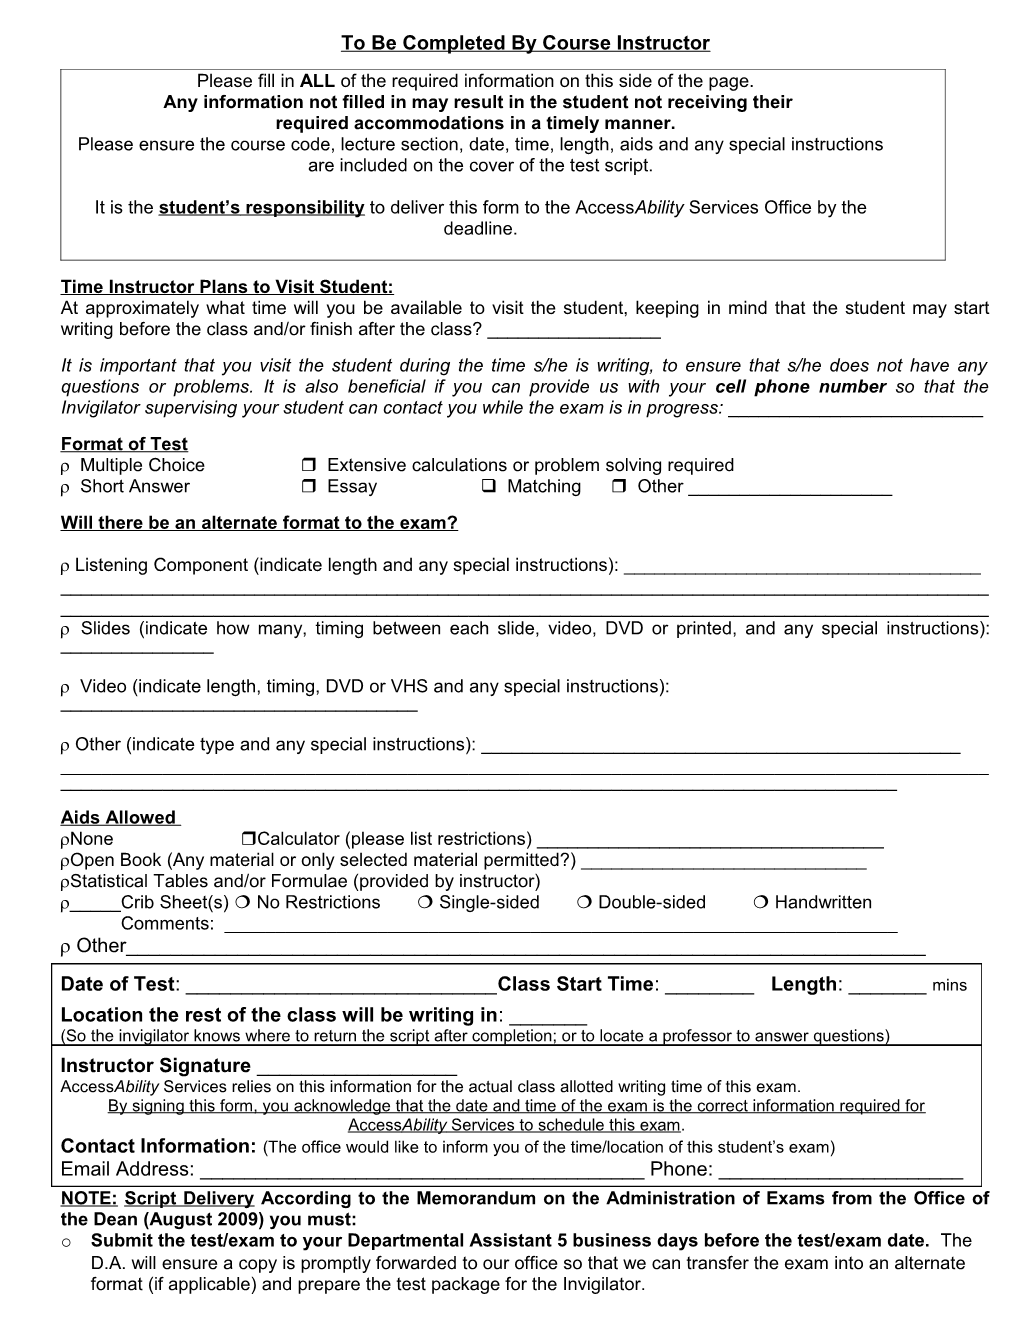 Accessability Services Final Exam Request Form